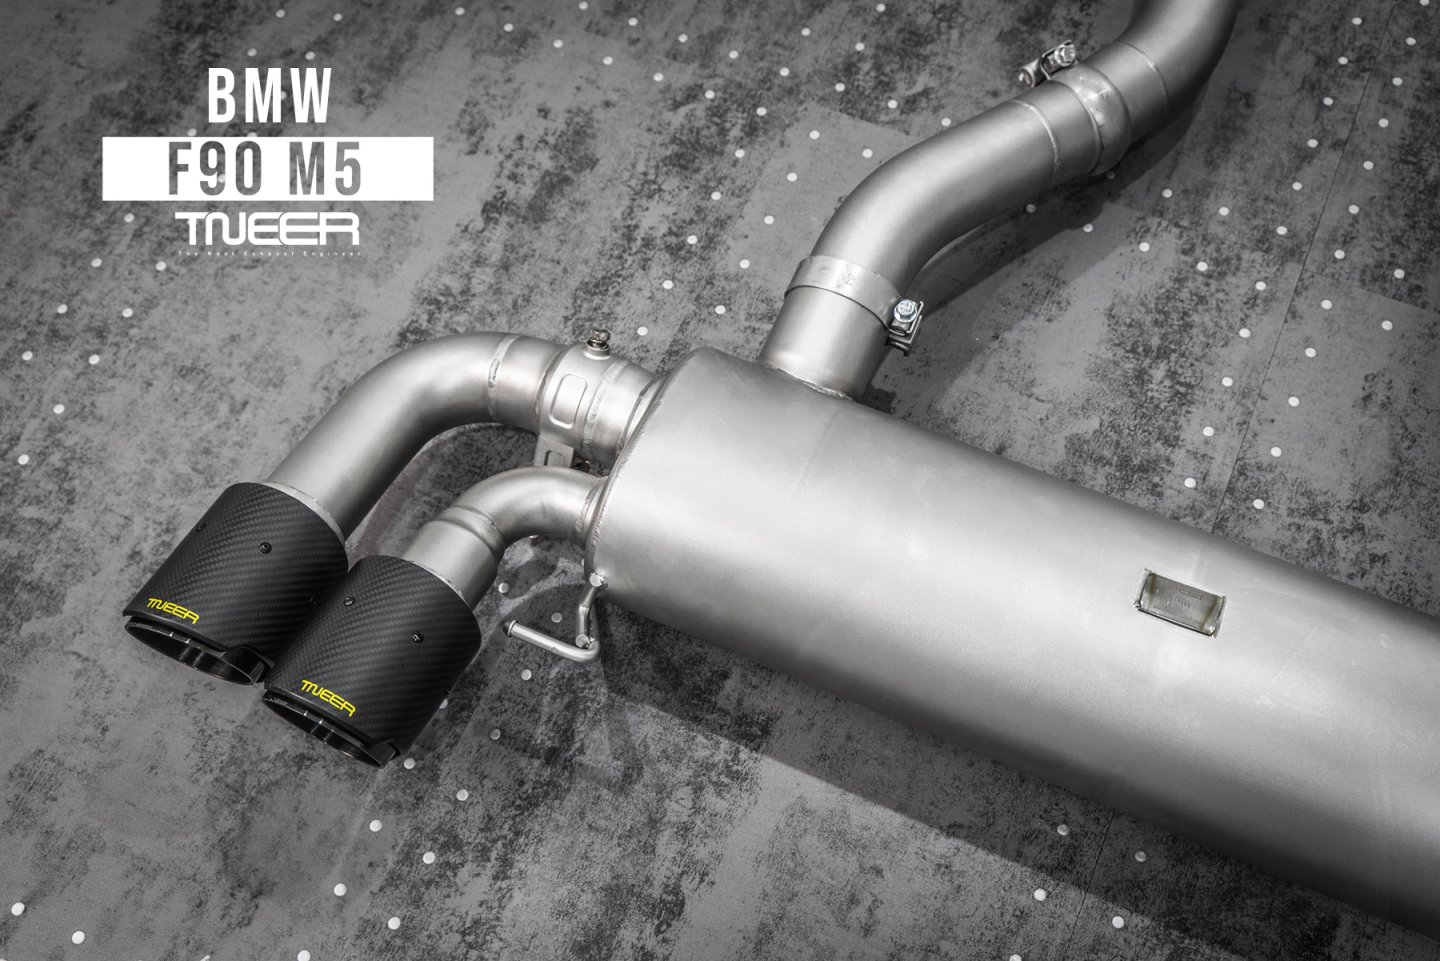 BMW F90 (M5) TNEER Exhaust System with EV and TACS